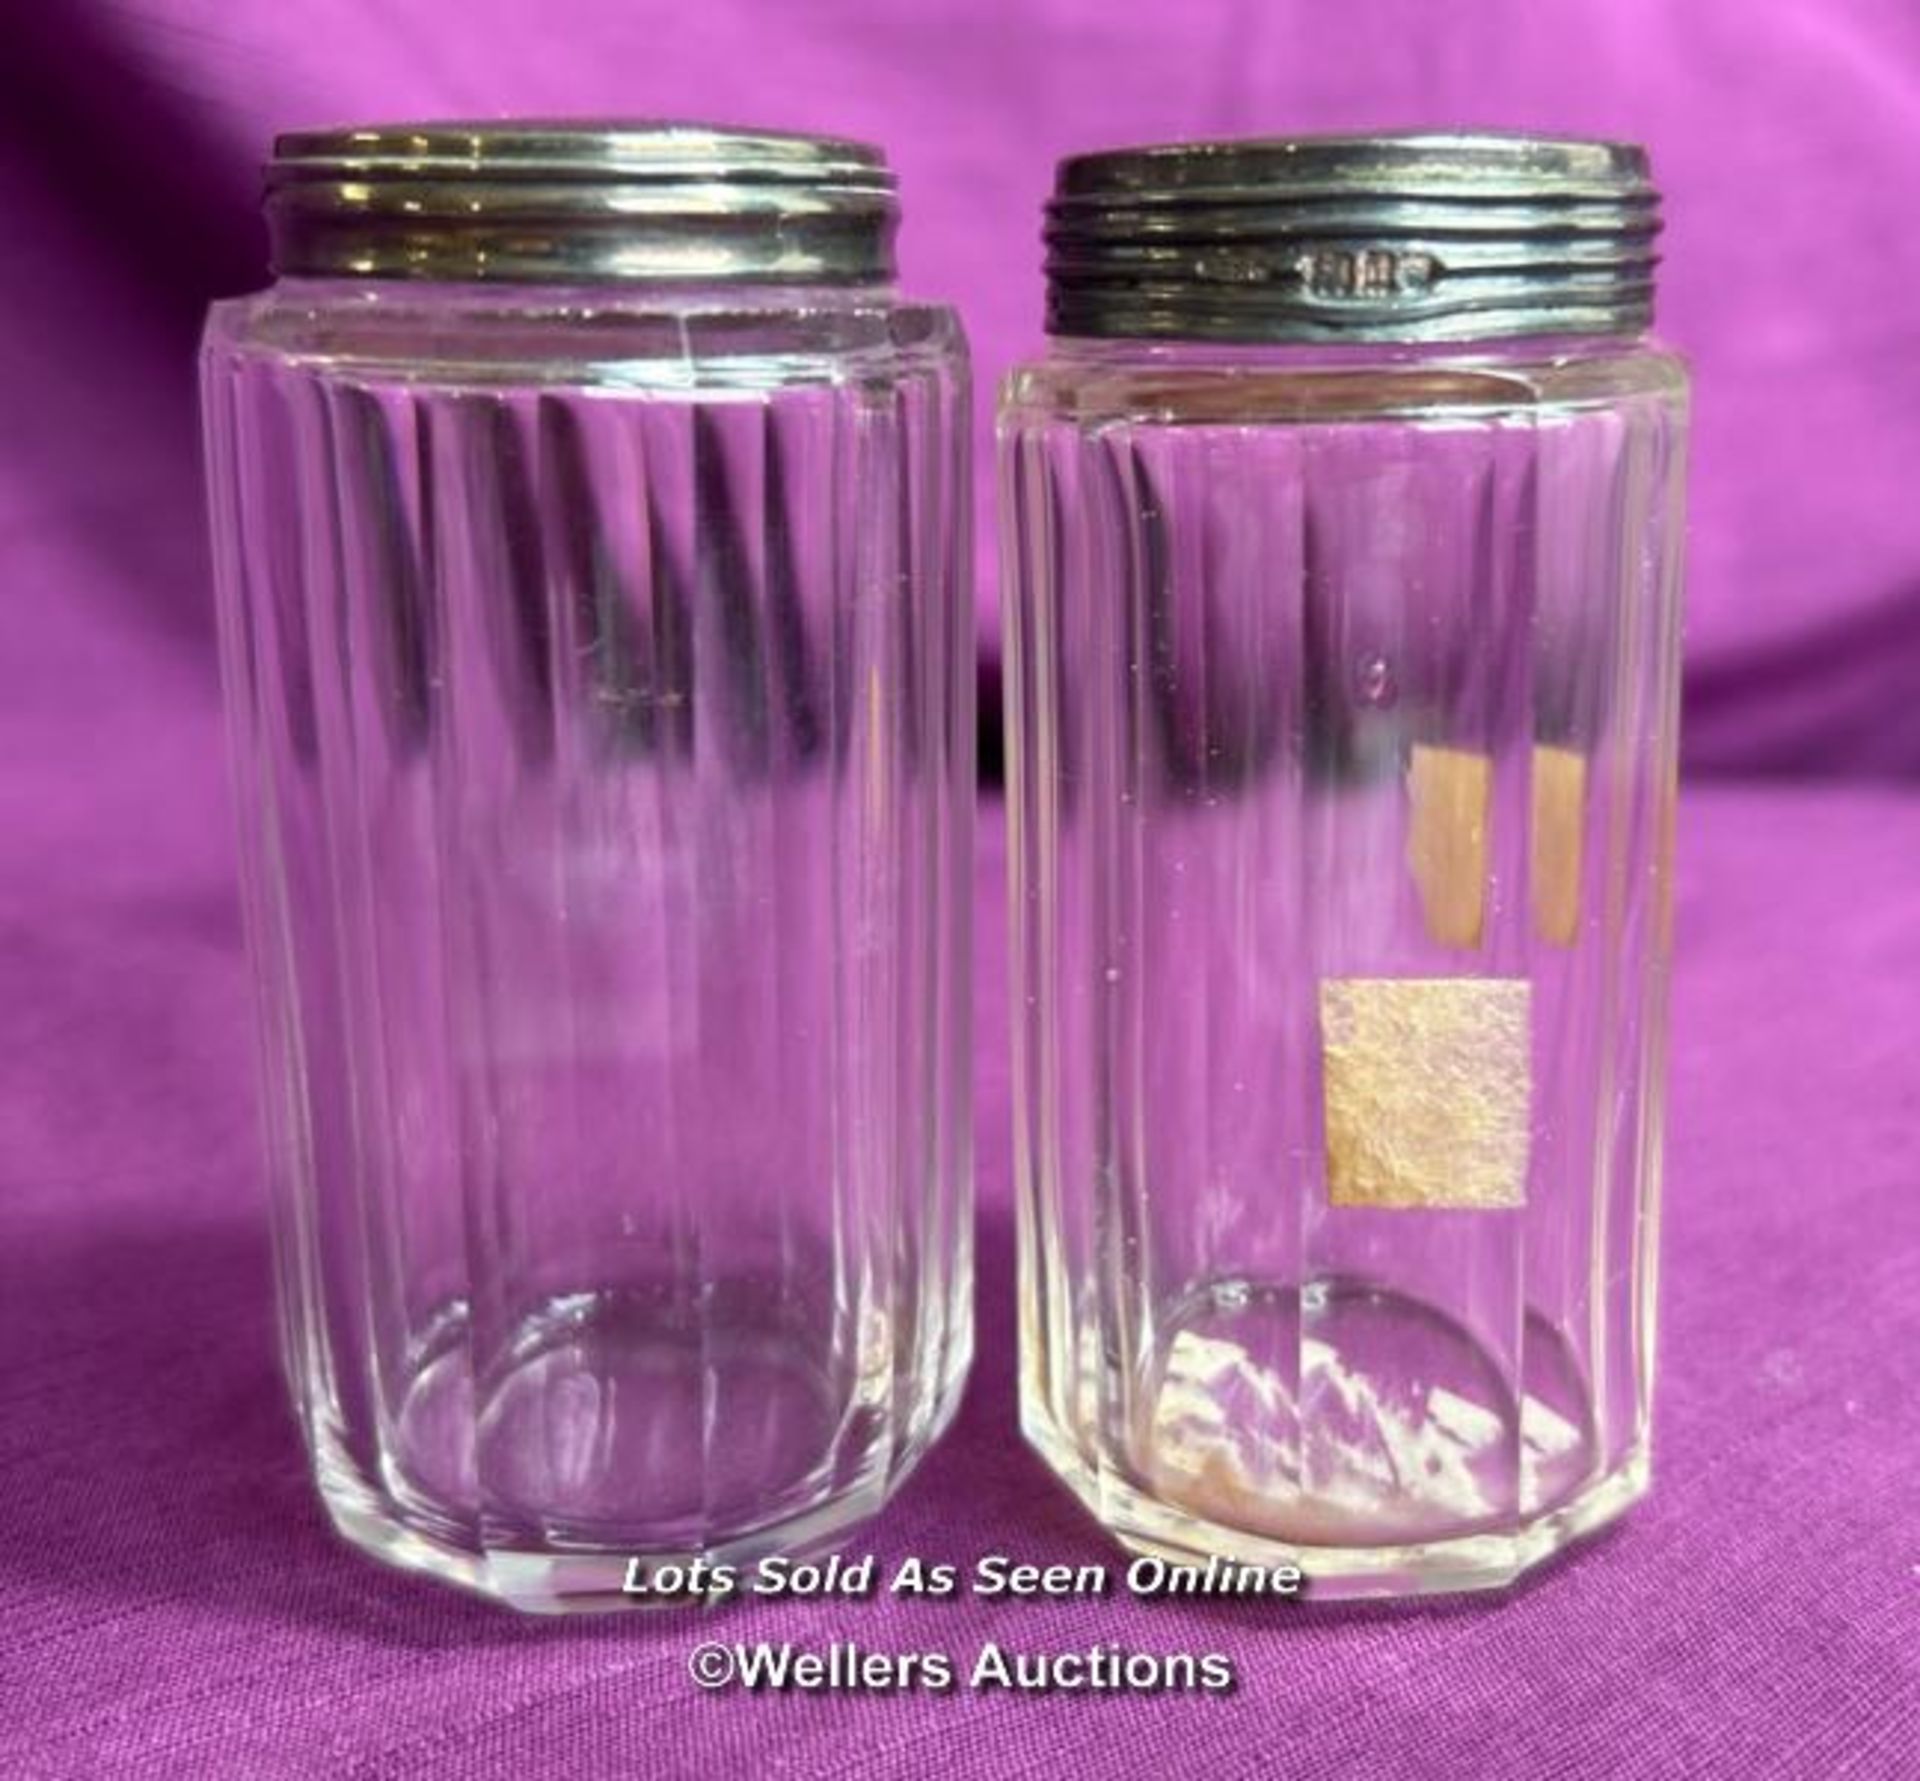 PAIR OF HALLMARKED SILVER TOPPED AND CUT GLASS BEVELLED JARS, HEIGHT 8.5CM, TOTAL SILVER WEIGHT